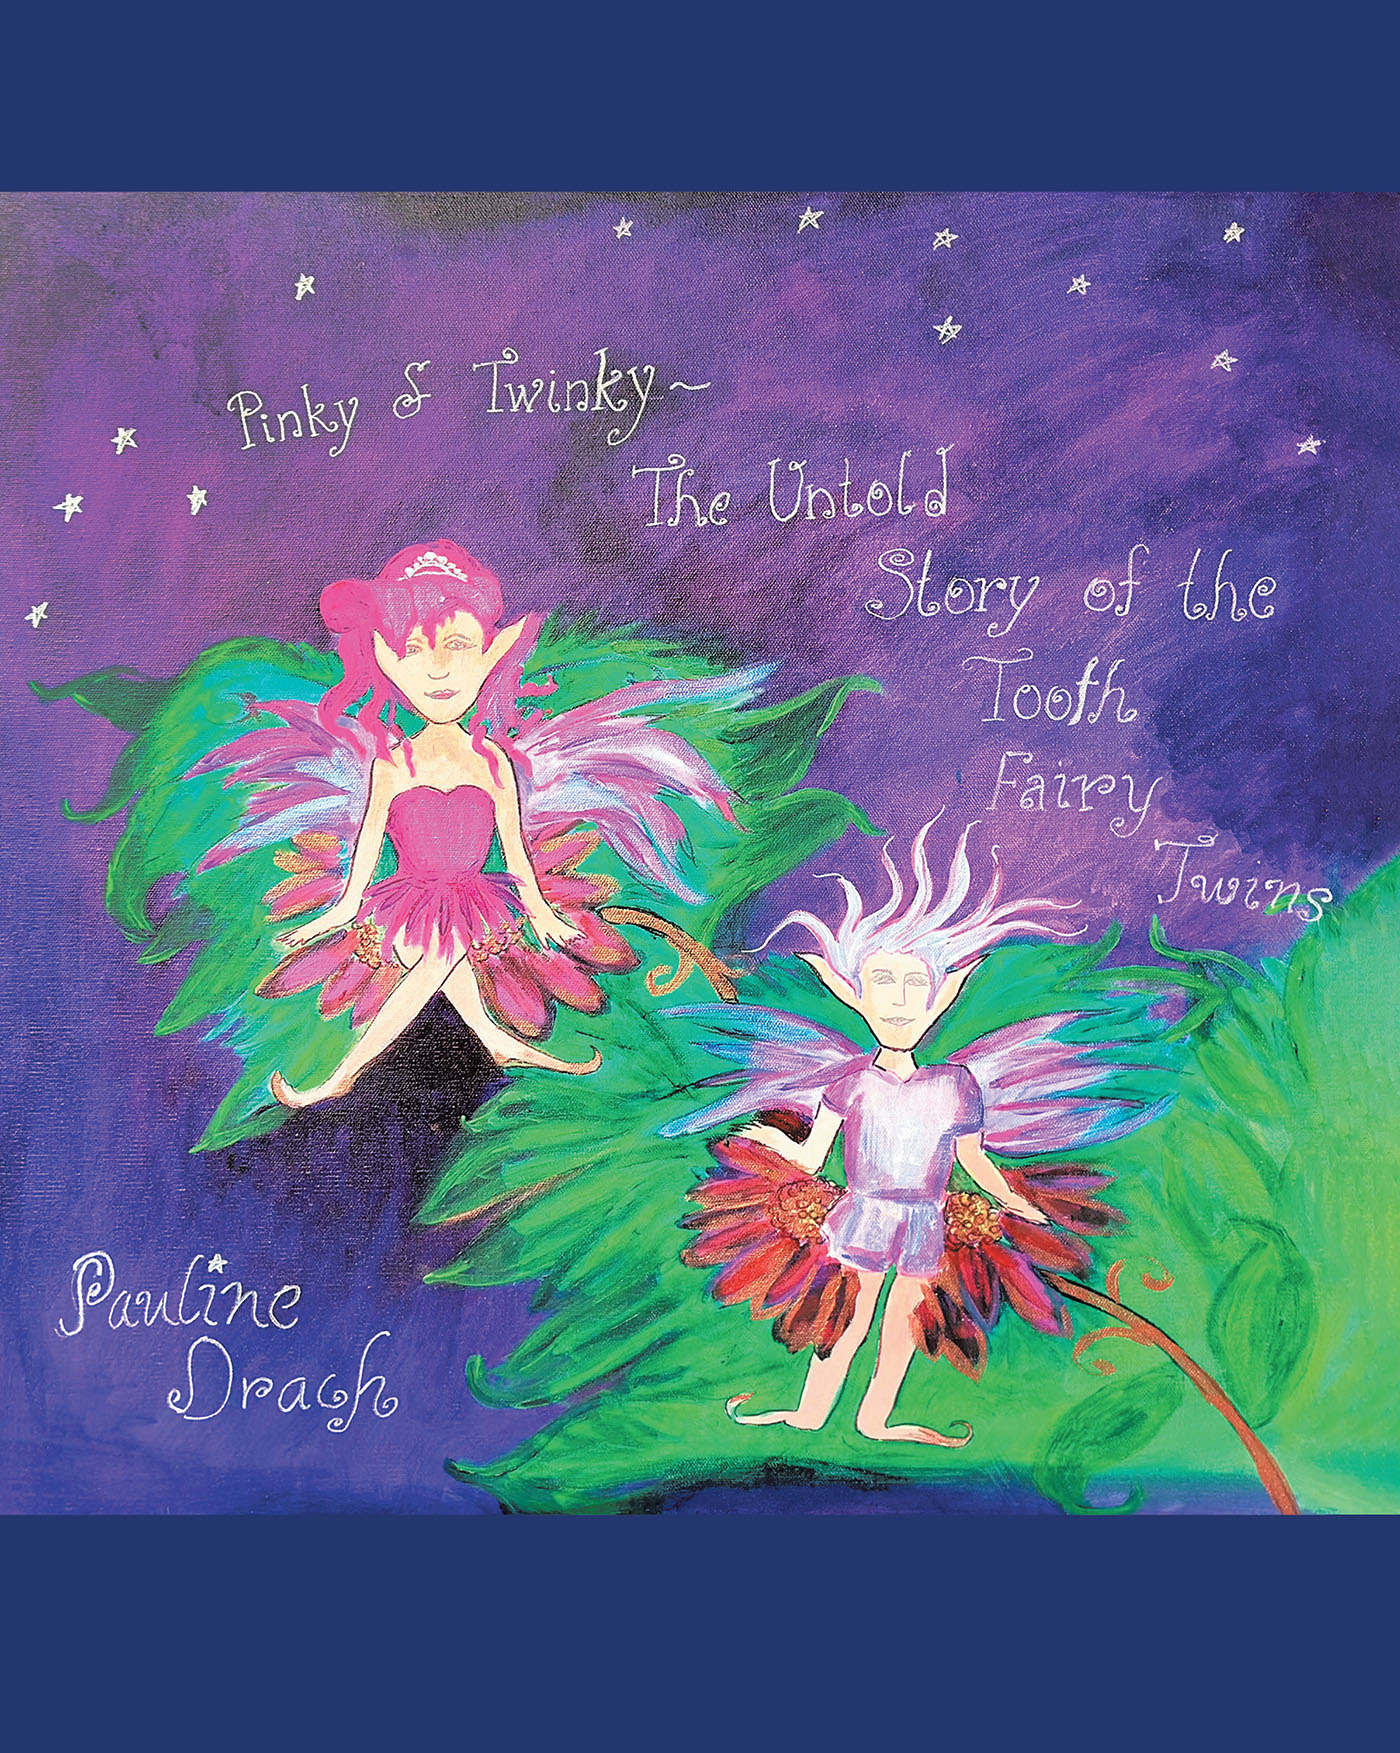 Pauline Drach’s New Book, “Pinky & Twinky: The Untold Story of the Tooth Fairy Twins,” Follows a Tooth Fairy Who Must Break a Curse That is Rotting the Teeth of Children